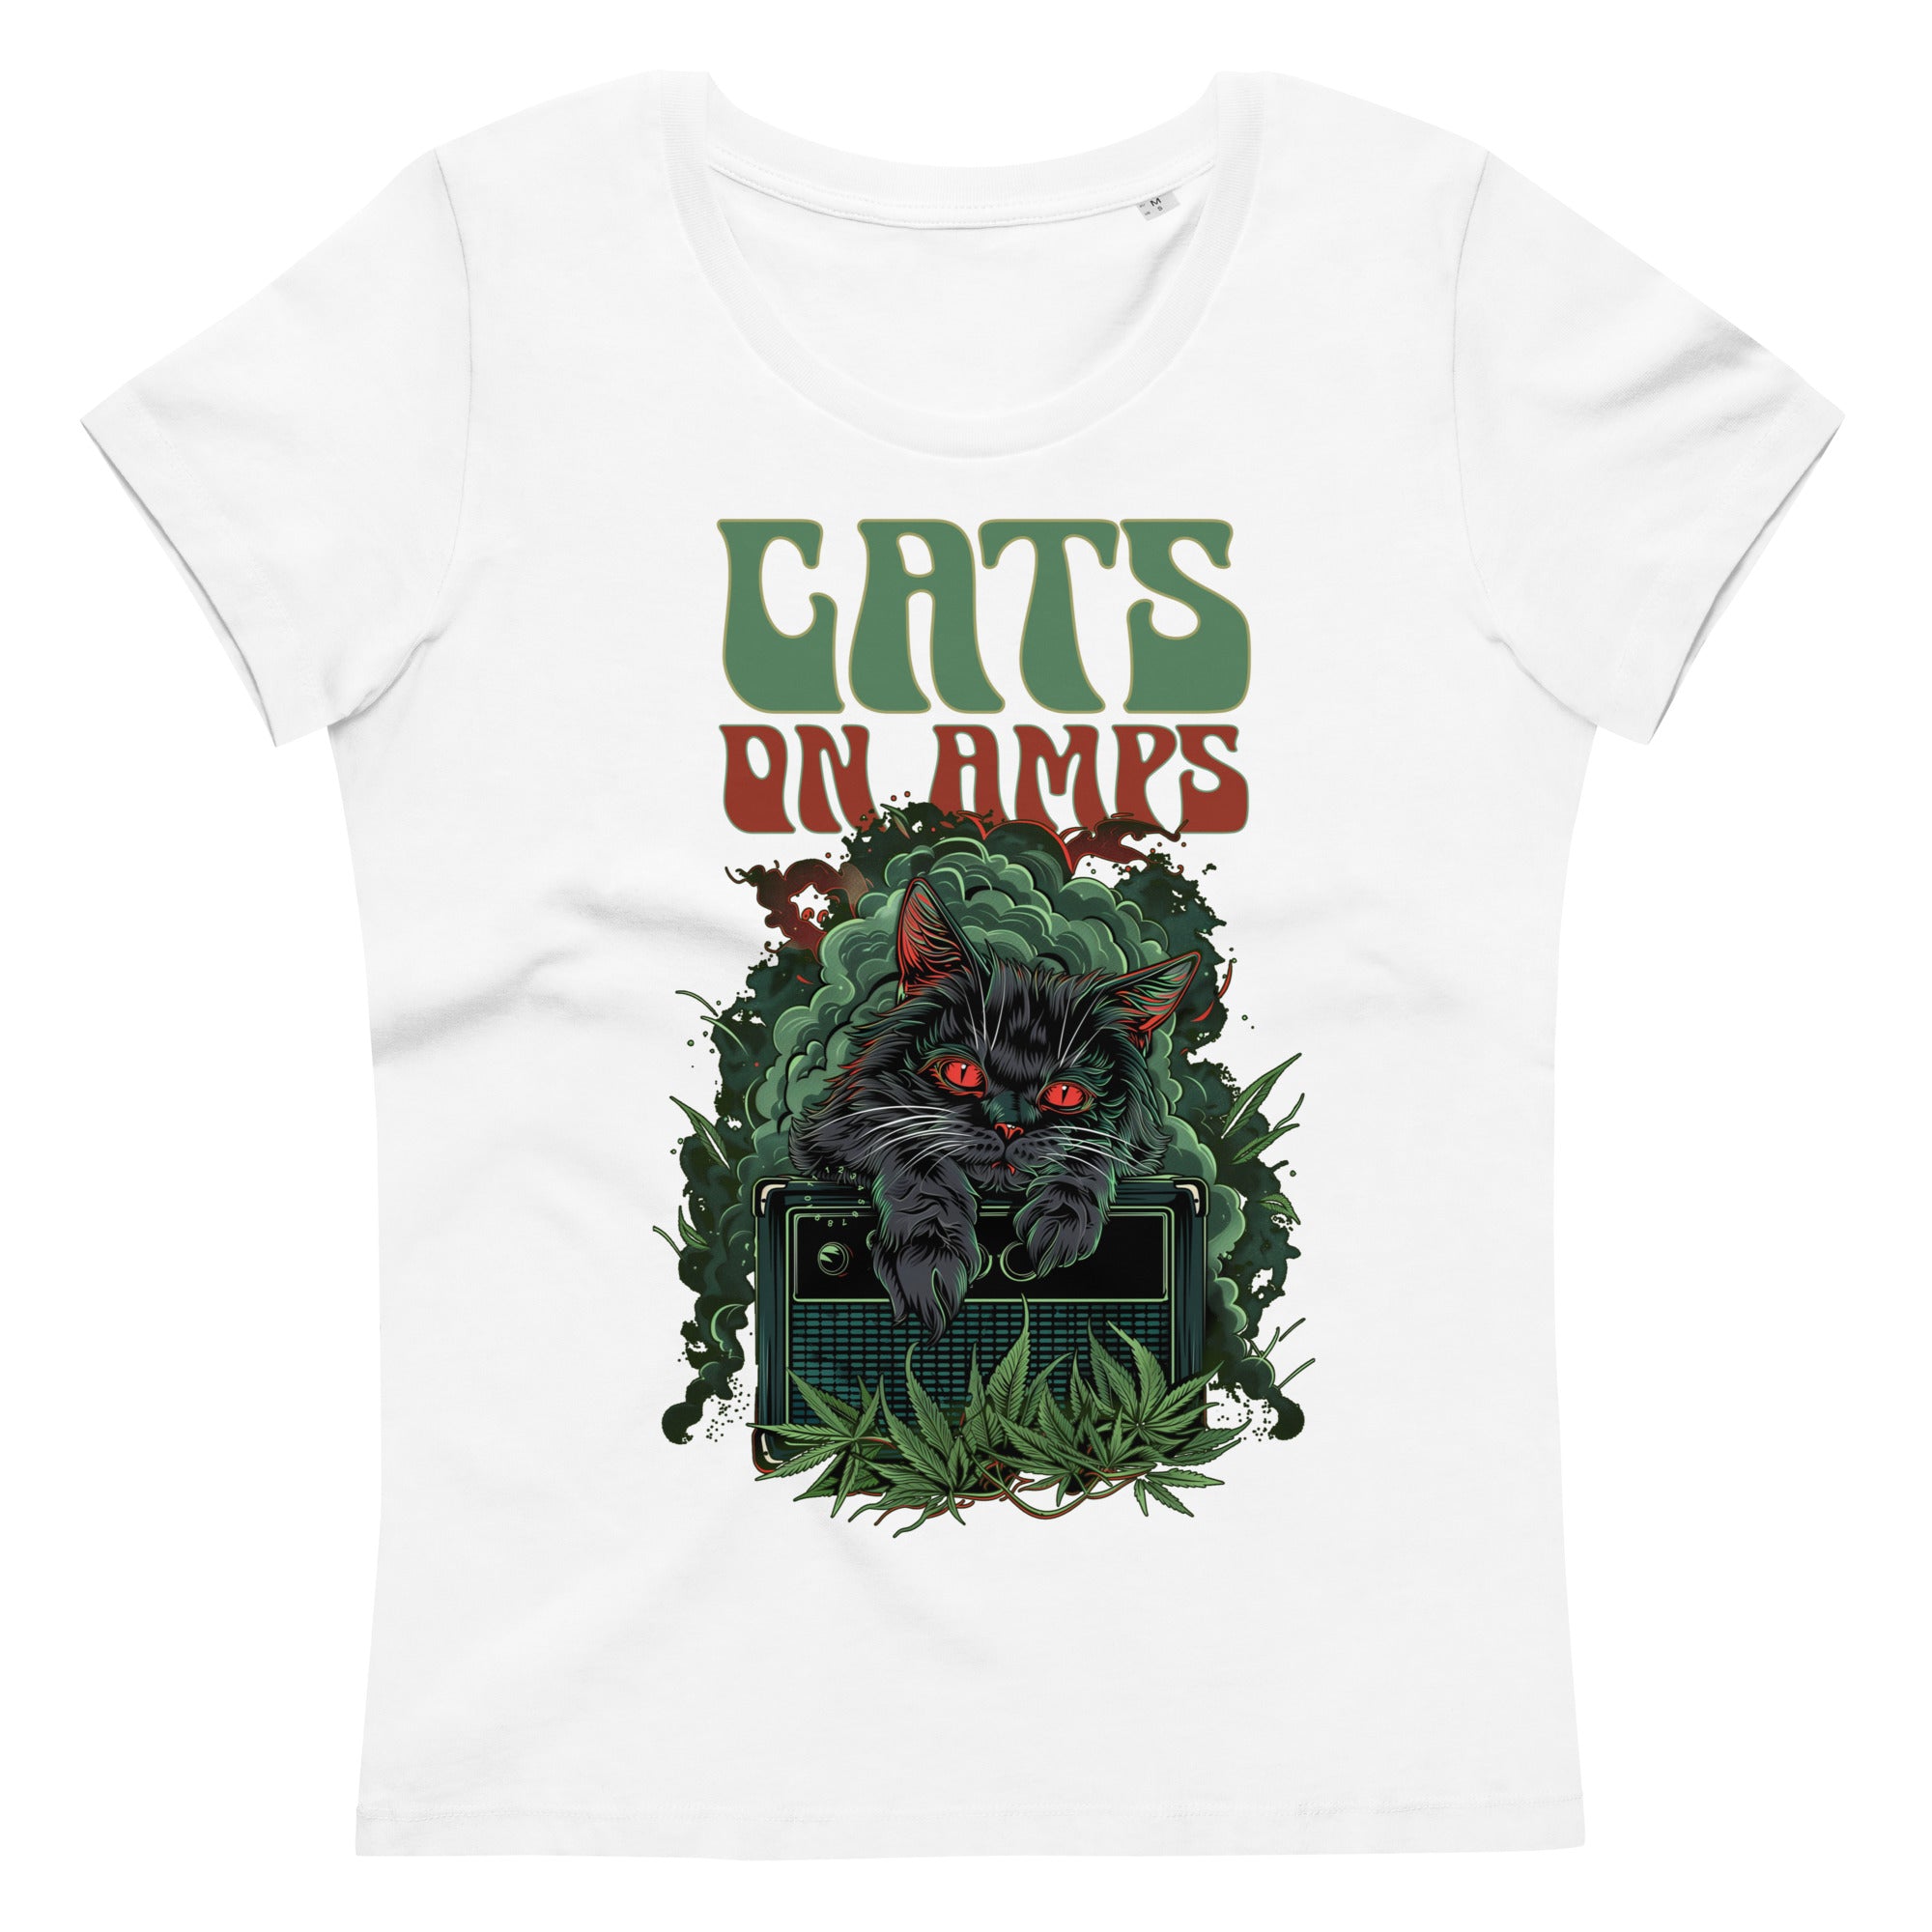 CATS ON AMPS - 420 Leaves - Women's fitted eco tee